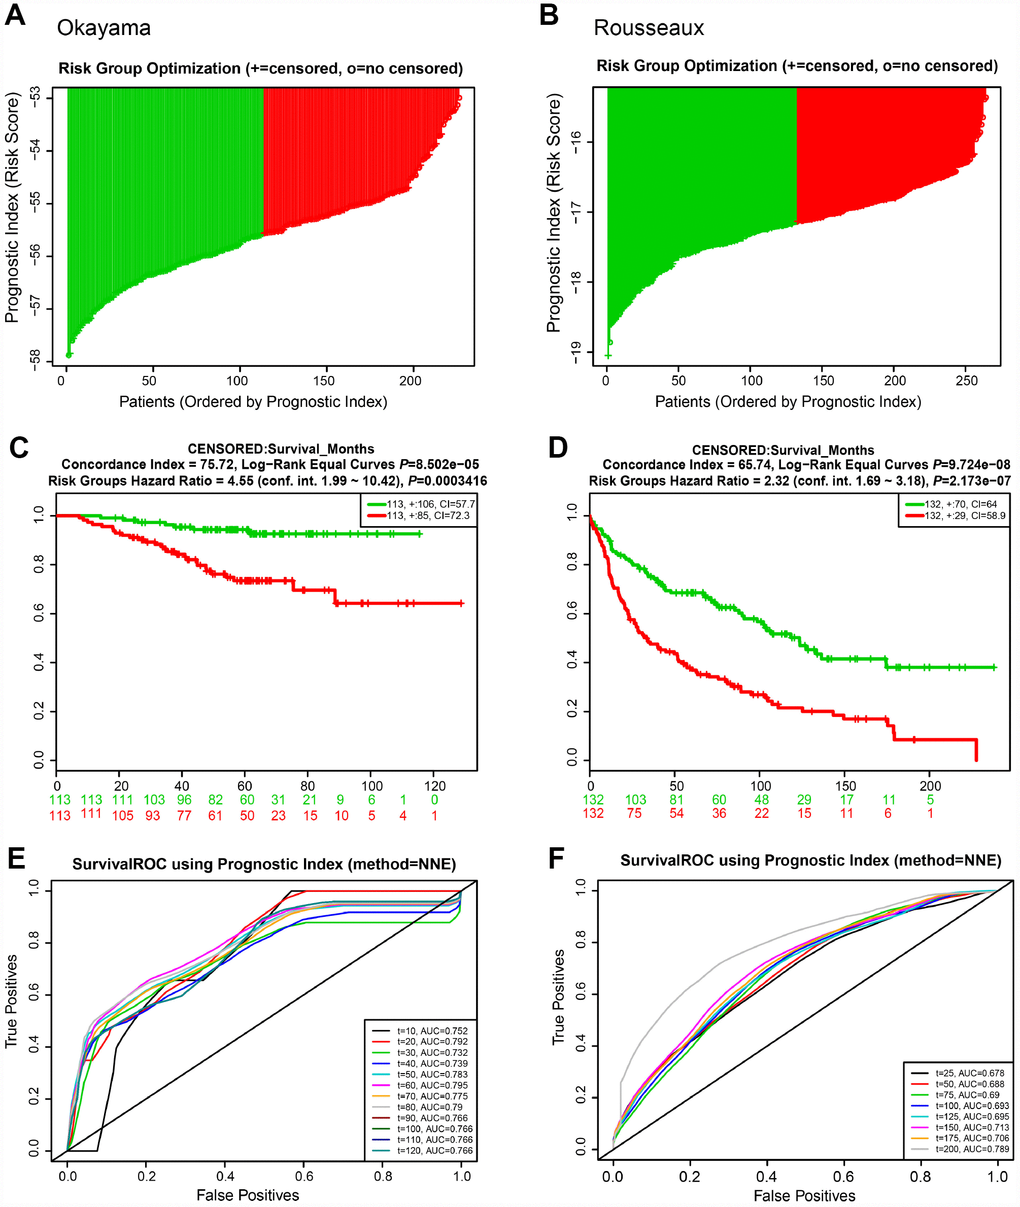 Risk scores of 22-autophagy gene signature were significantly associated with survival in the Okayama and Rousseaux cohorts. The distribution of risk score (A), Kaplan-Meier survival curve (C), and ROC curve (E) for the Okayama cohort. The distribution of risk score (B), Kaplan-Meier survival curve (D), and ROC curve (F) for the Rousseaux cohort.